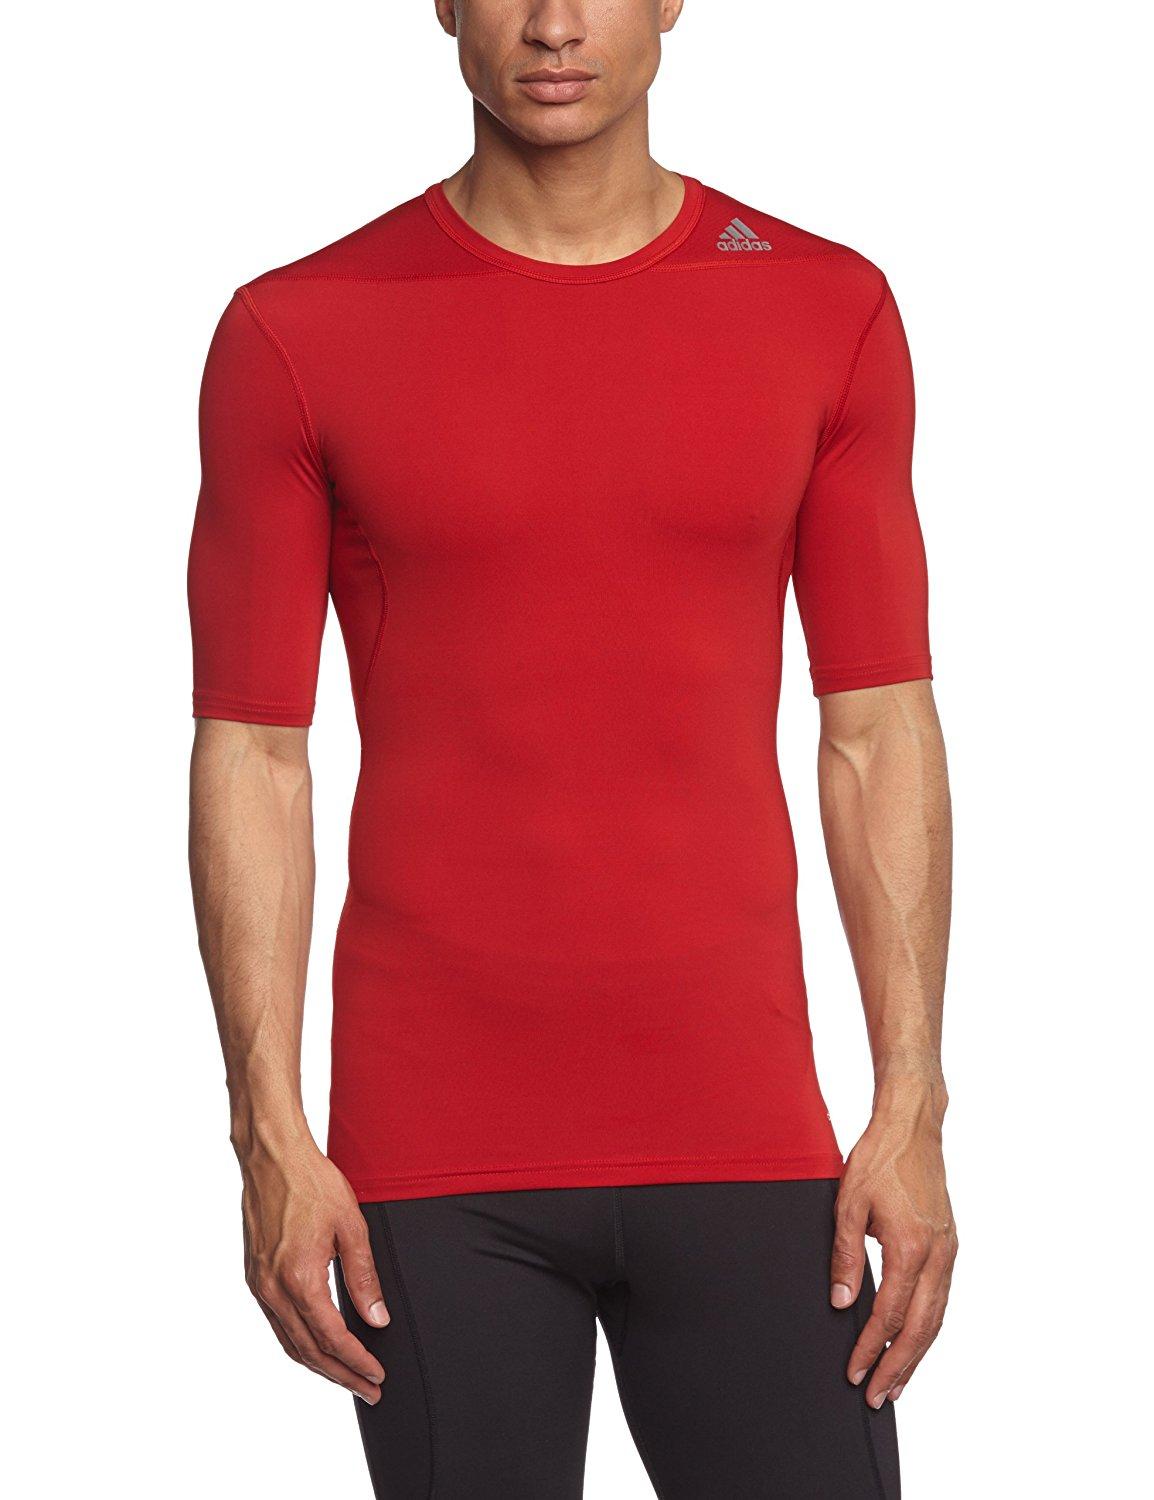 adidas Techfit Compression Top Men's Red New without Tags L - Locker Room  Direct